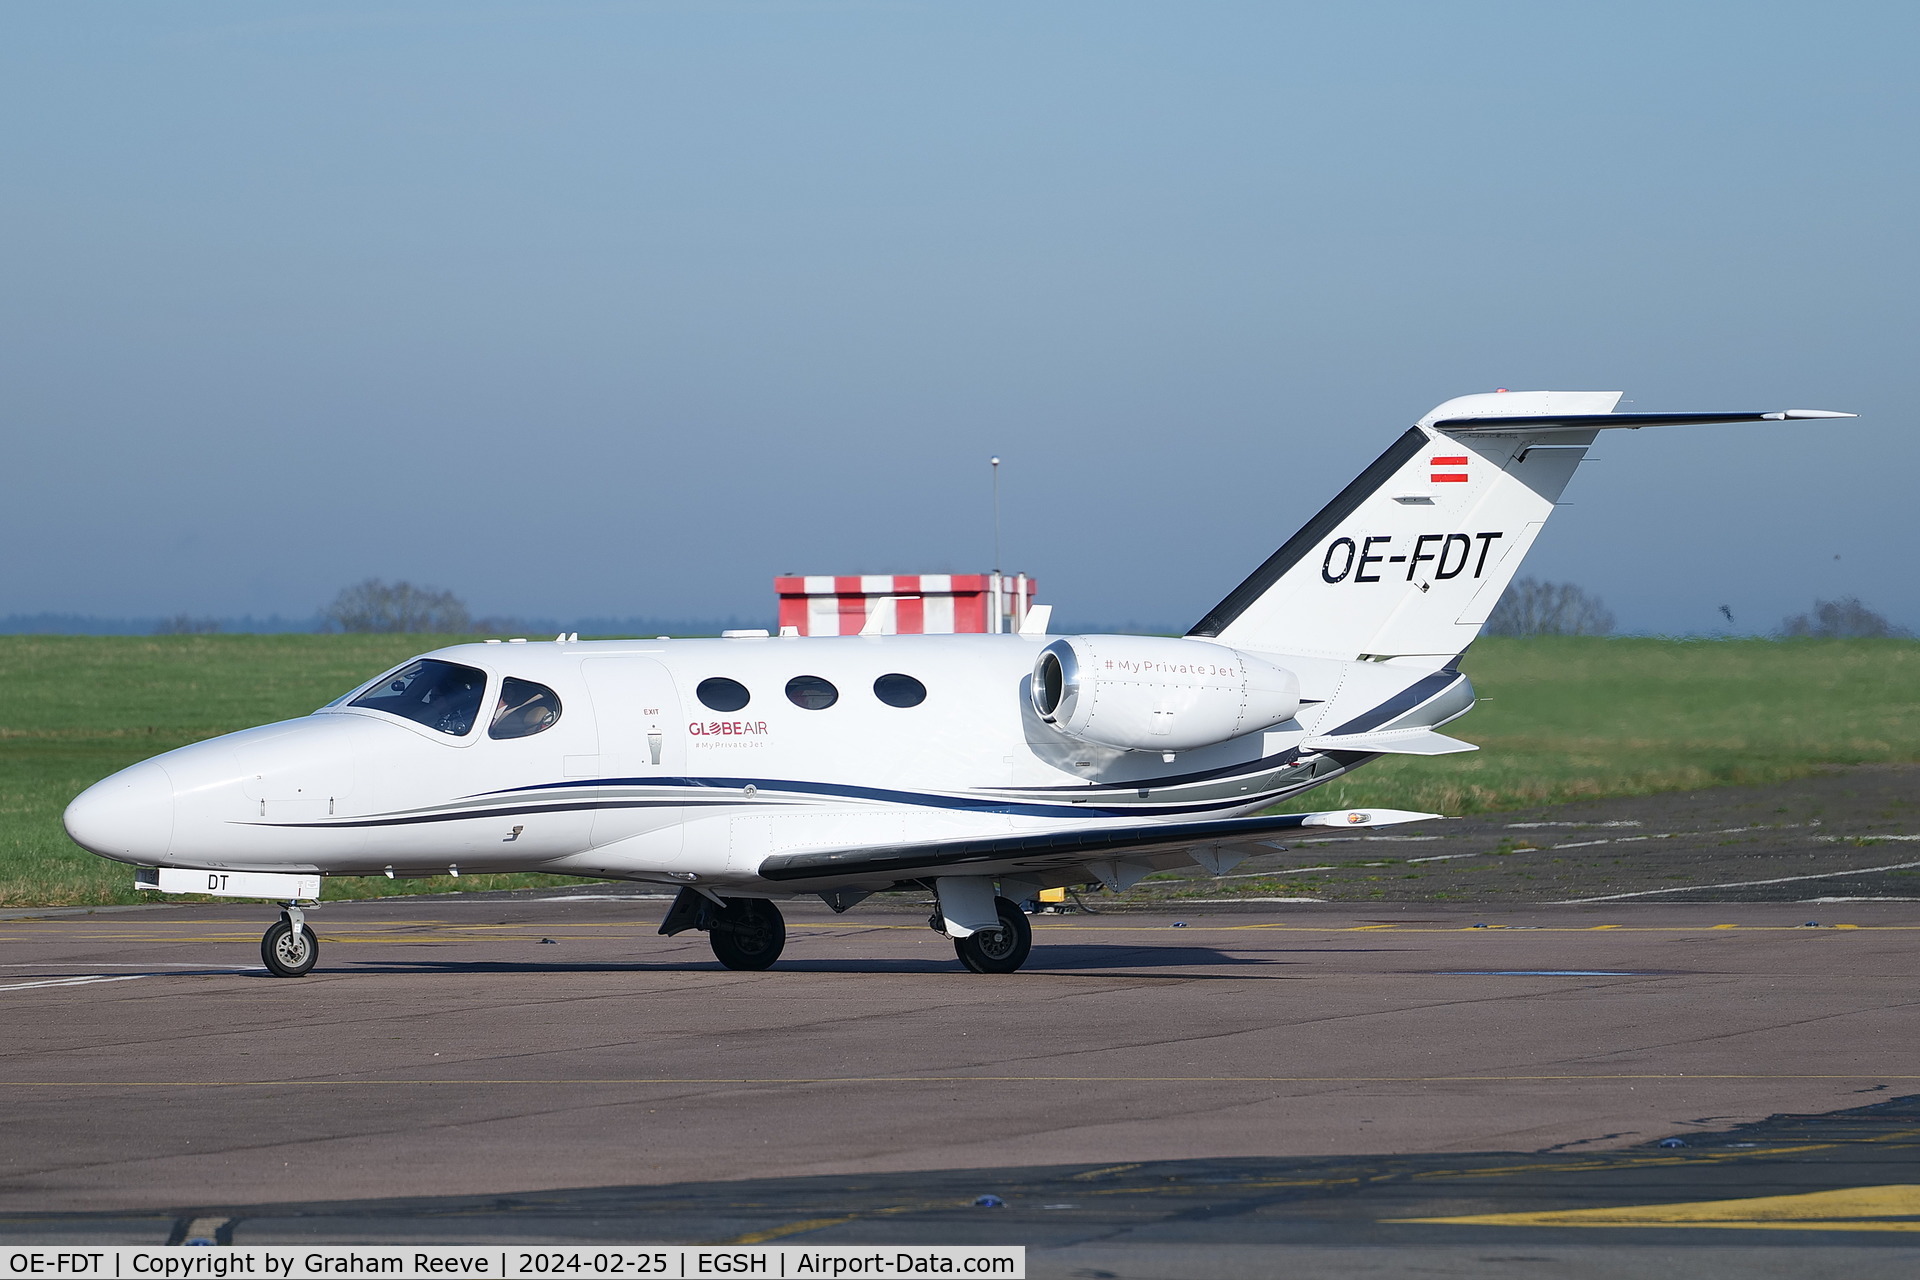 OE-FDT, 2009 Cessna 510 Citation Mustang Citation Mustang C/N 510-0156, Just landed at Norwich.